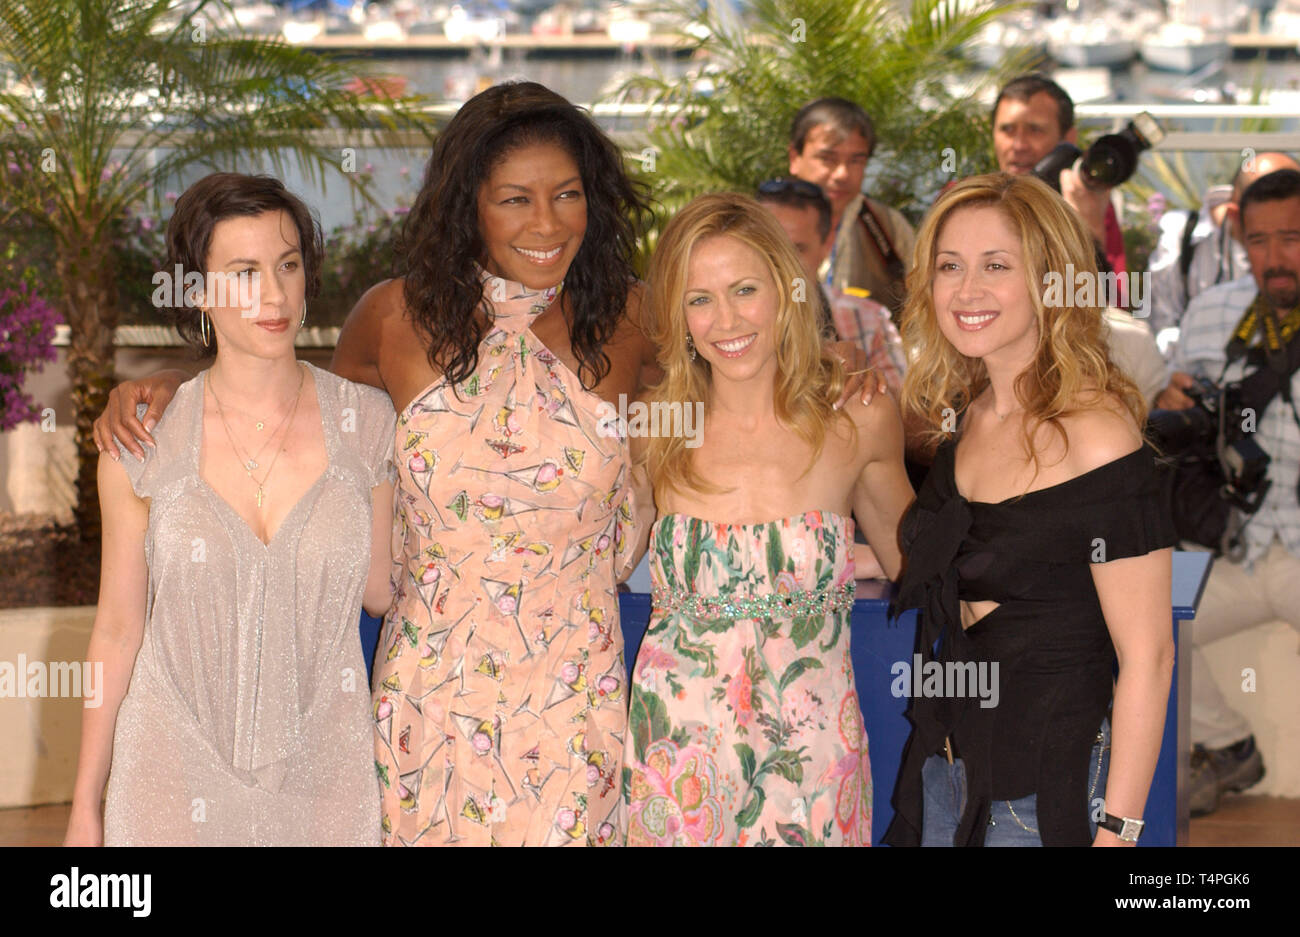 CANNES, FRANCE. May 22, 2004: ALANIS MORISSETTE (left), NATALIE COLE, SHERYL CROW & LARA FABIAN at photocall for their new movie De-Lovely which is the closing film of the 57th Festival de Cannes. Stock Photo